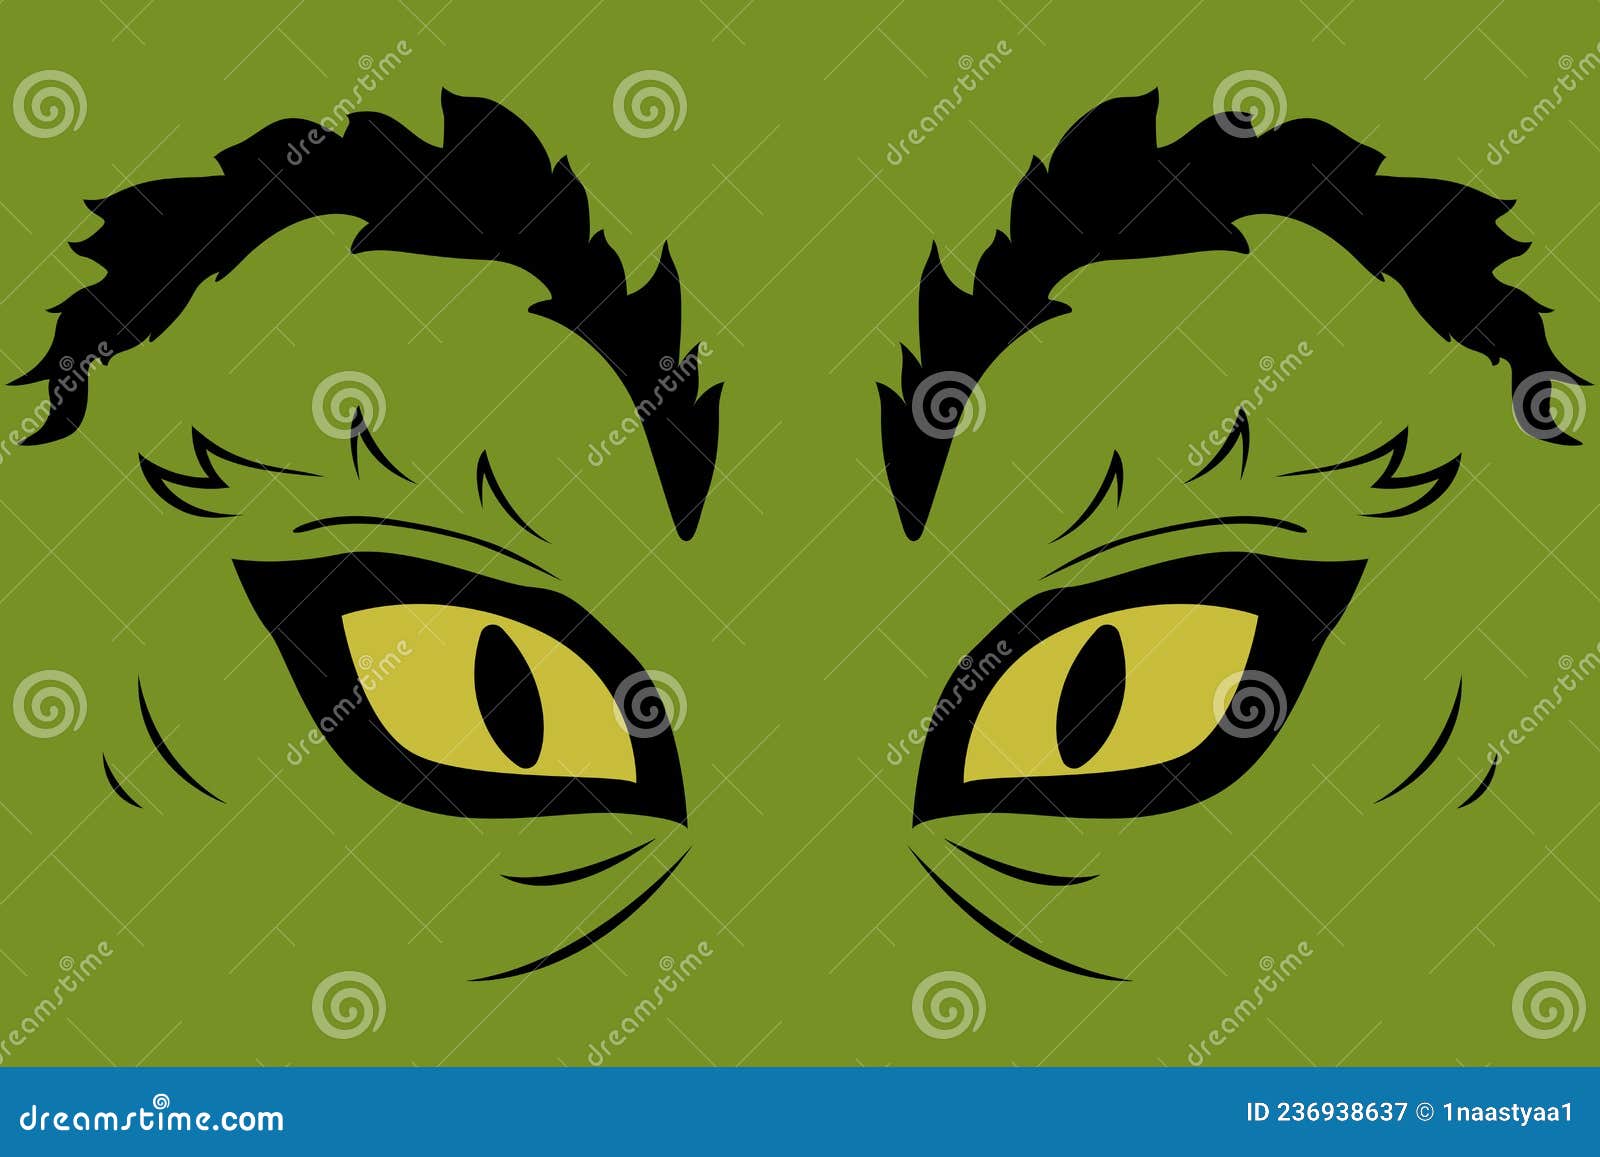 grinch eyes with a cheerful grin, silhouette, grinch face outlines, background, grinch